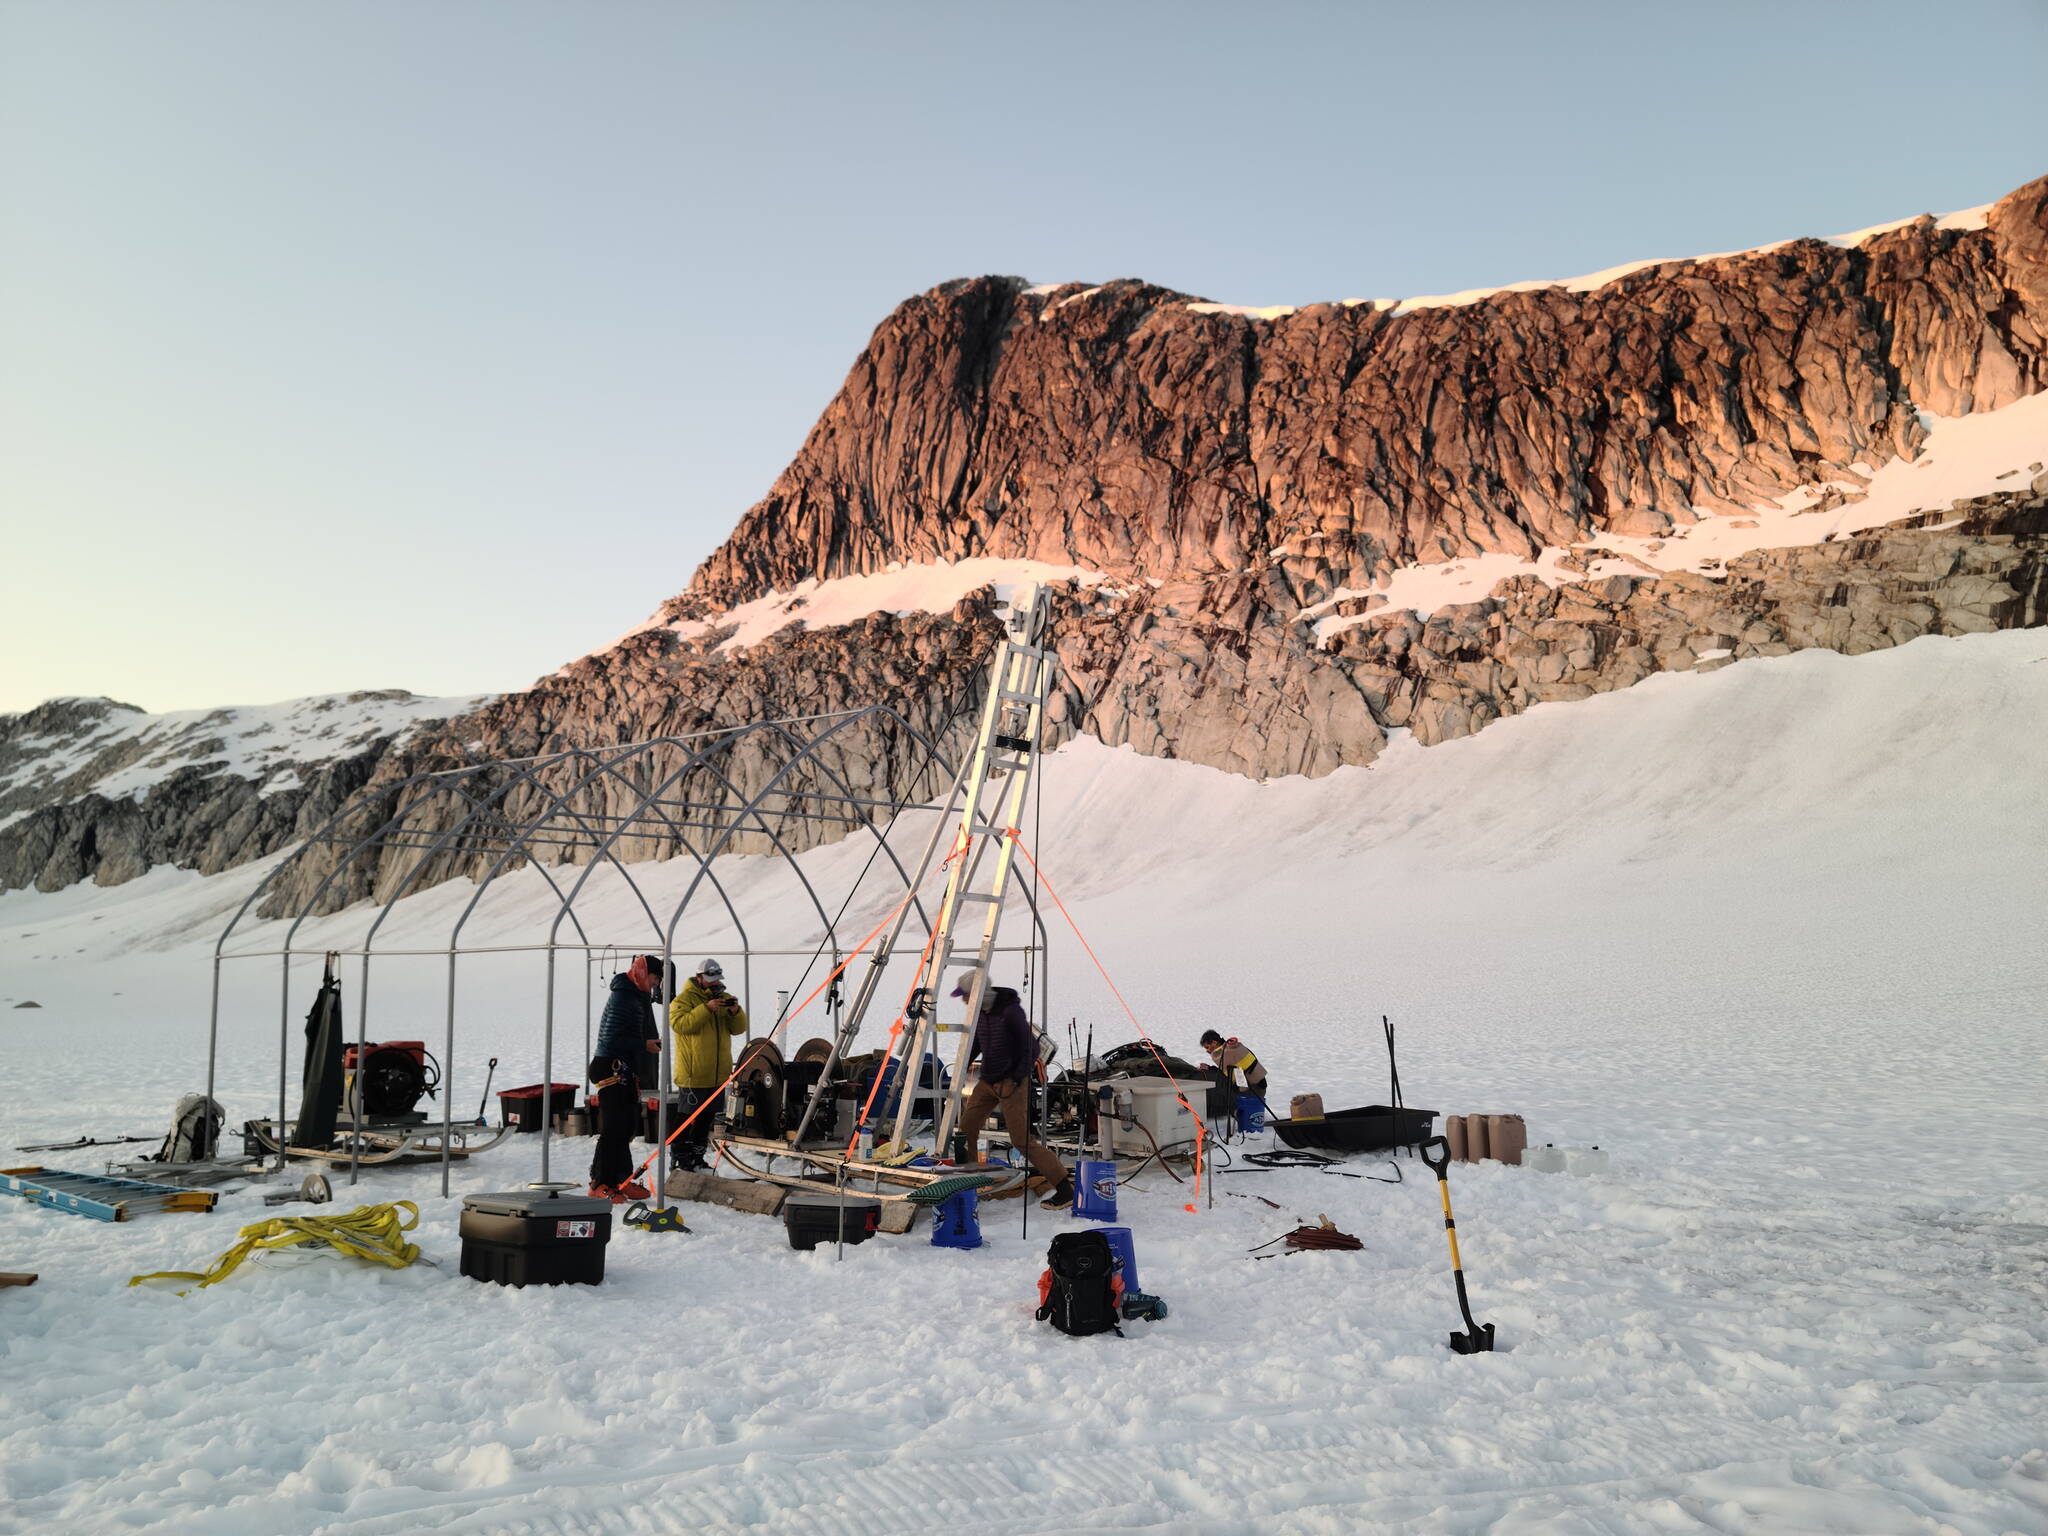 Researchers gather at a camp and data-collection site on the Juneau Icefield earlier this month during a project intended to aid with the study of the Jupiter ice moon Europa. (Photo courtesy of Jacob Holmes)